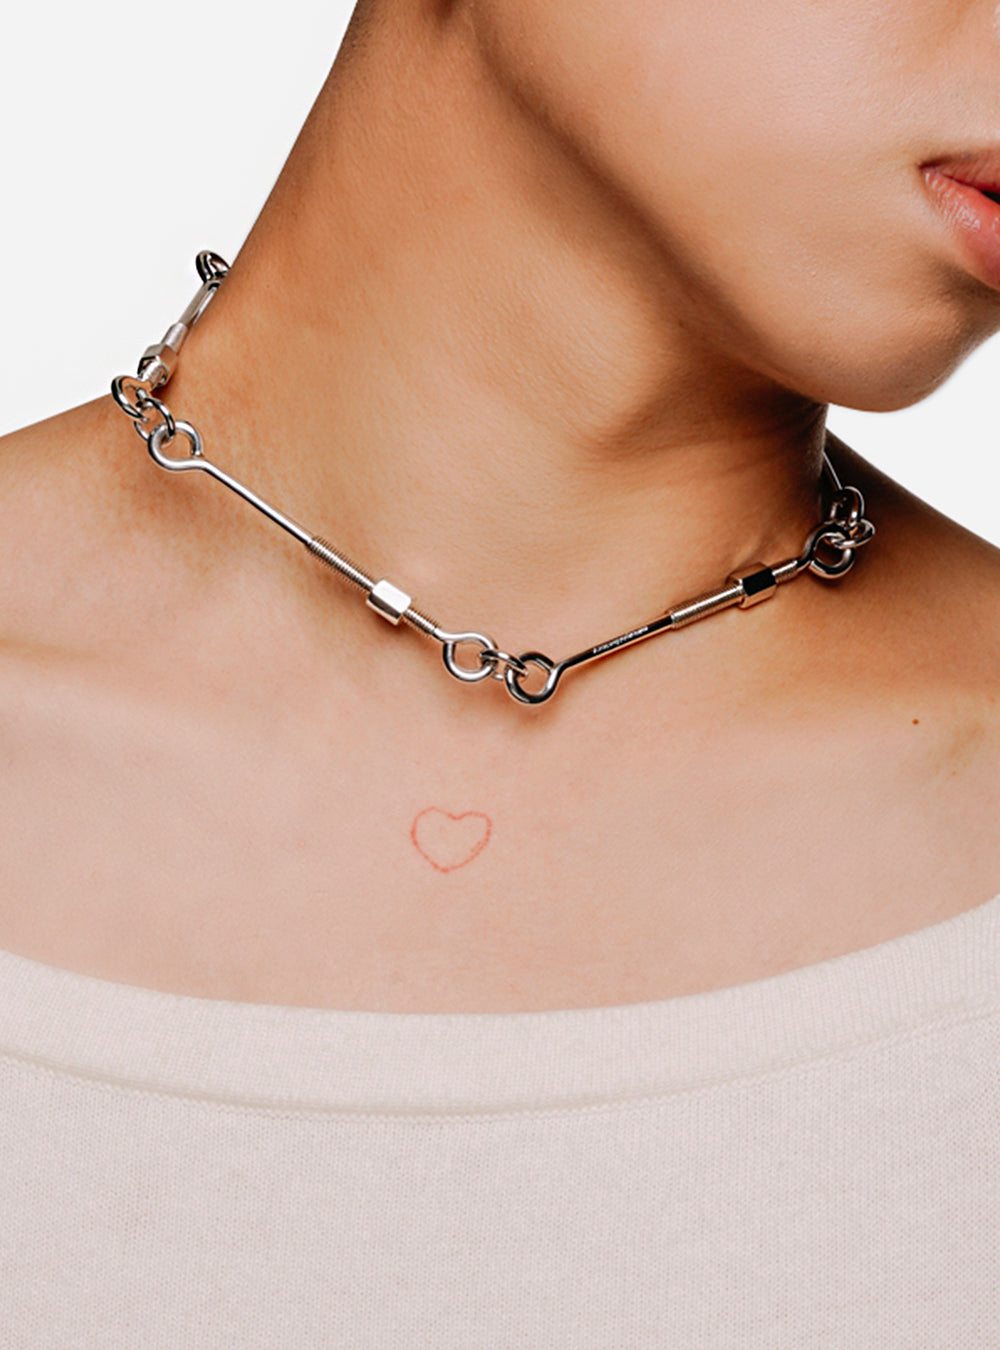 A woman wearing a MIDNIGHTFACTORY Screw-bolts bar necklace with a heart on it.